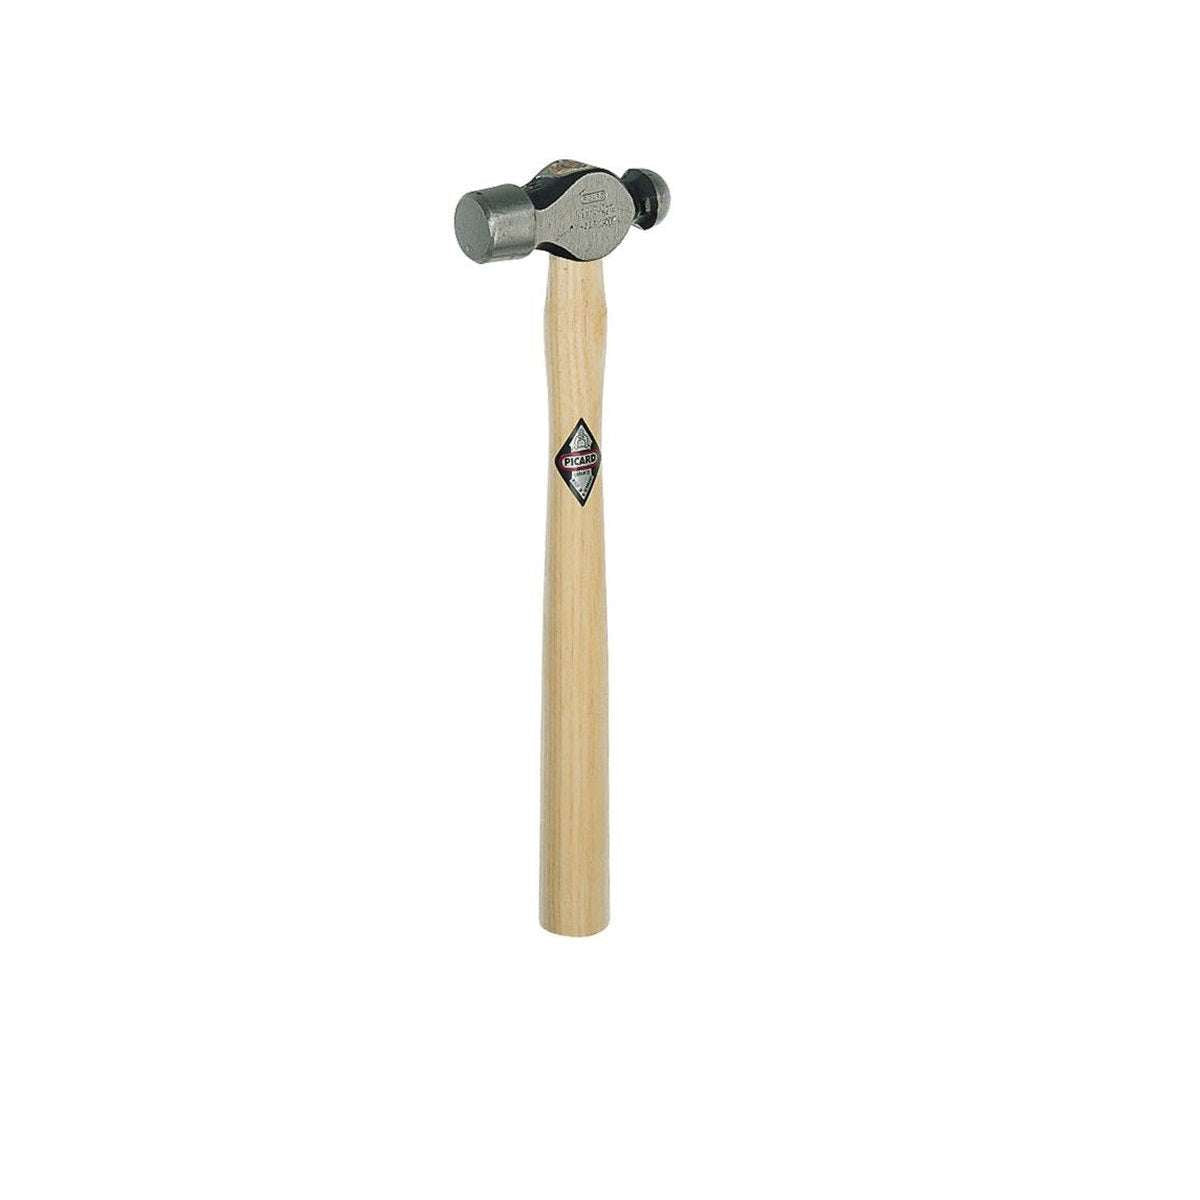 Ball peen hammer for boilermakers and tinsmiths 225g grey - Picard